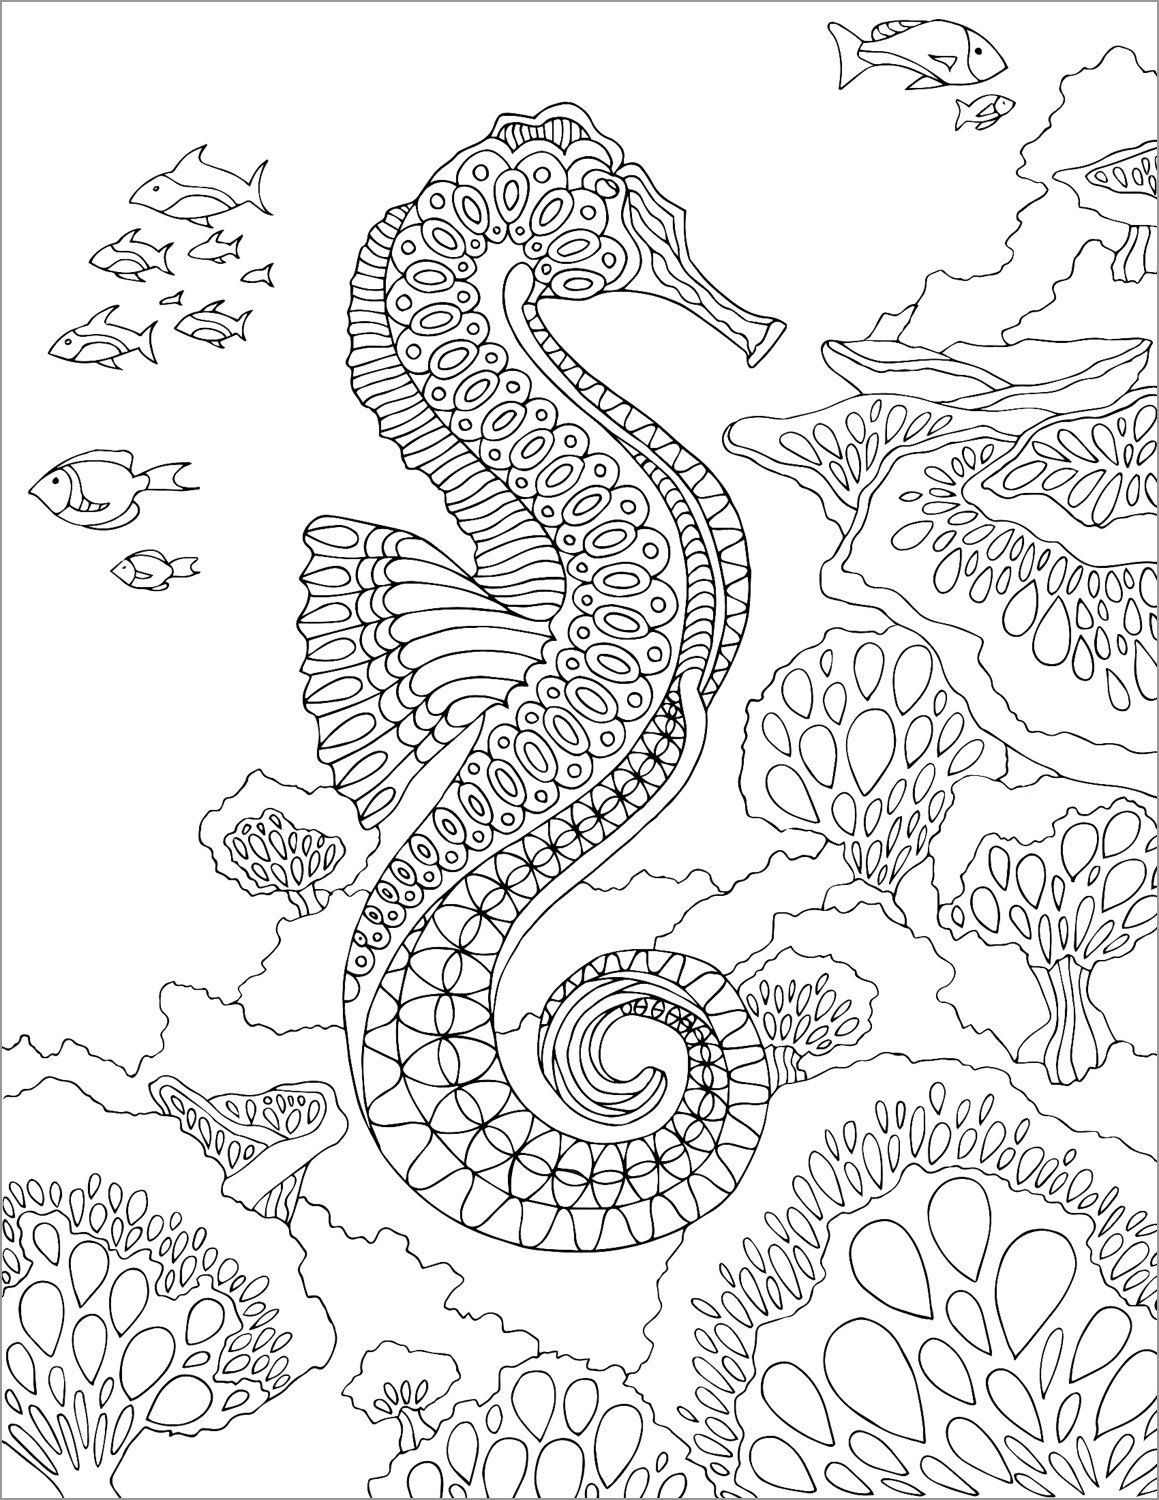 Zentangle Seahorse Coloring Page for Adult